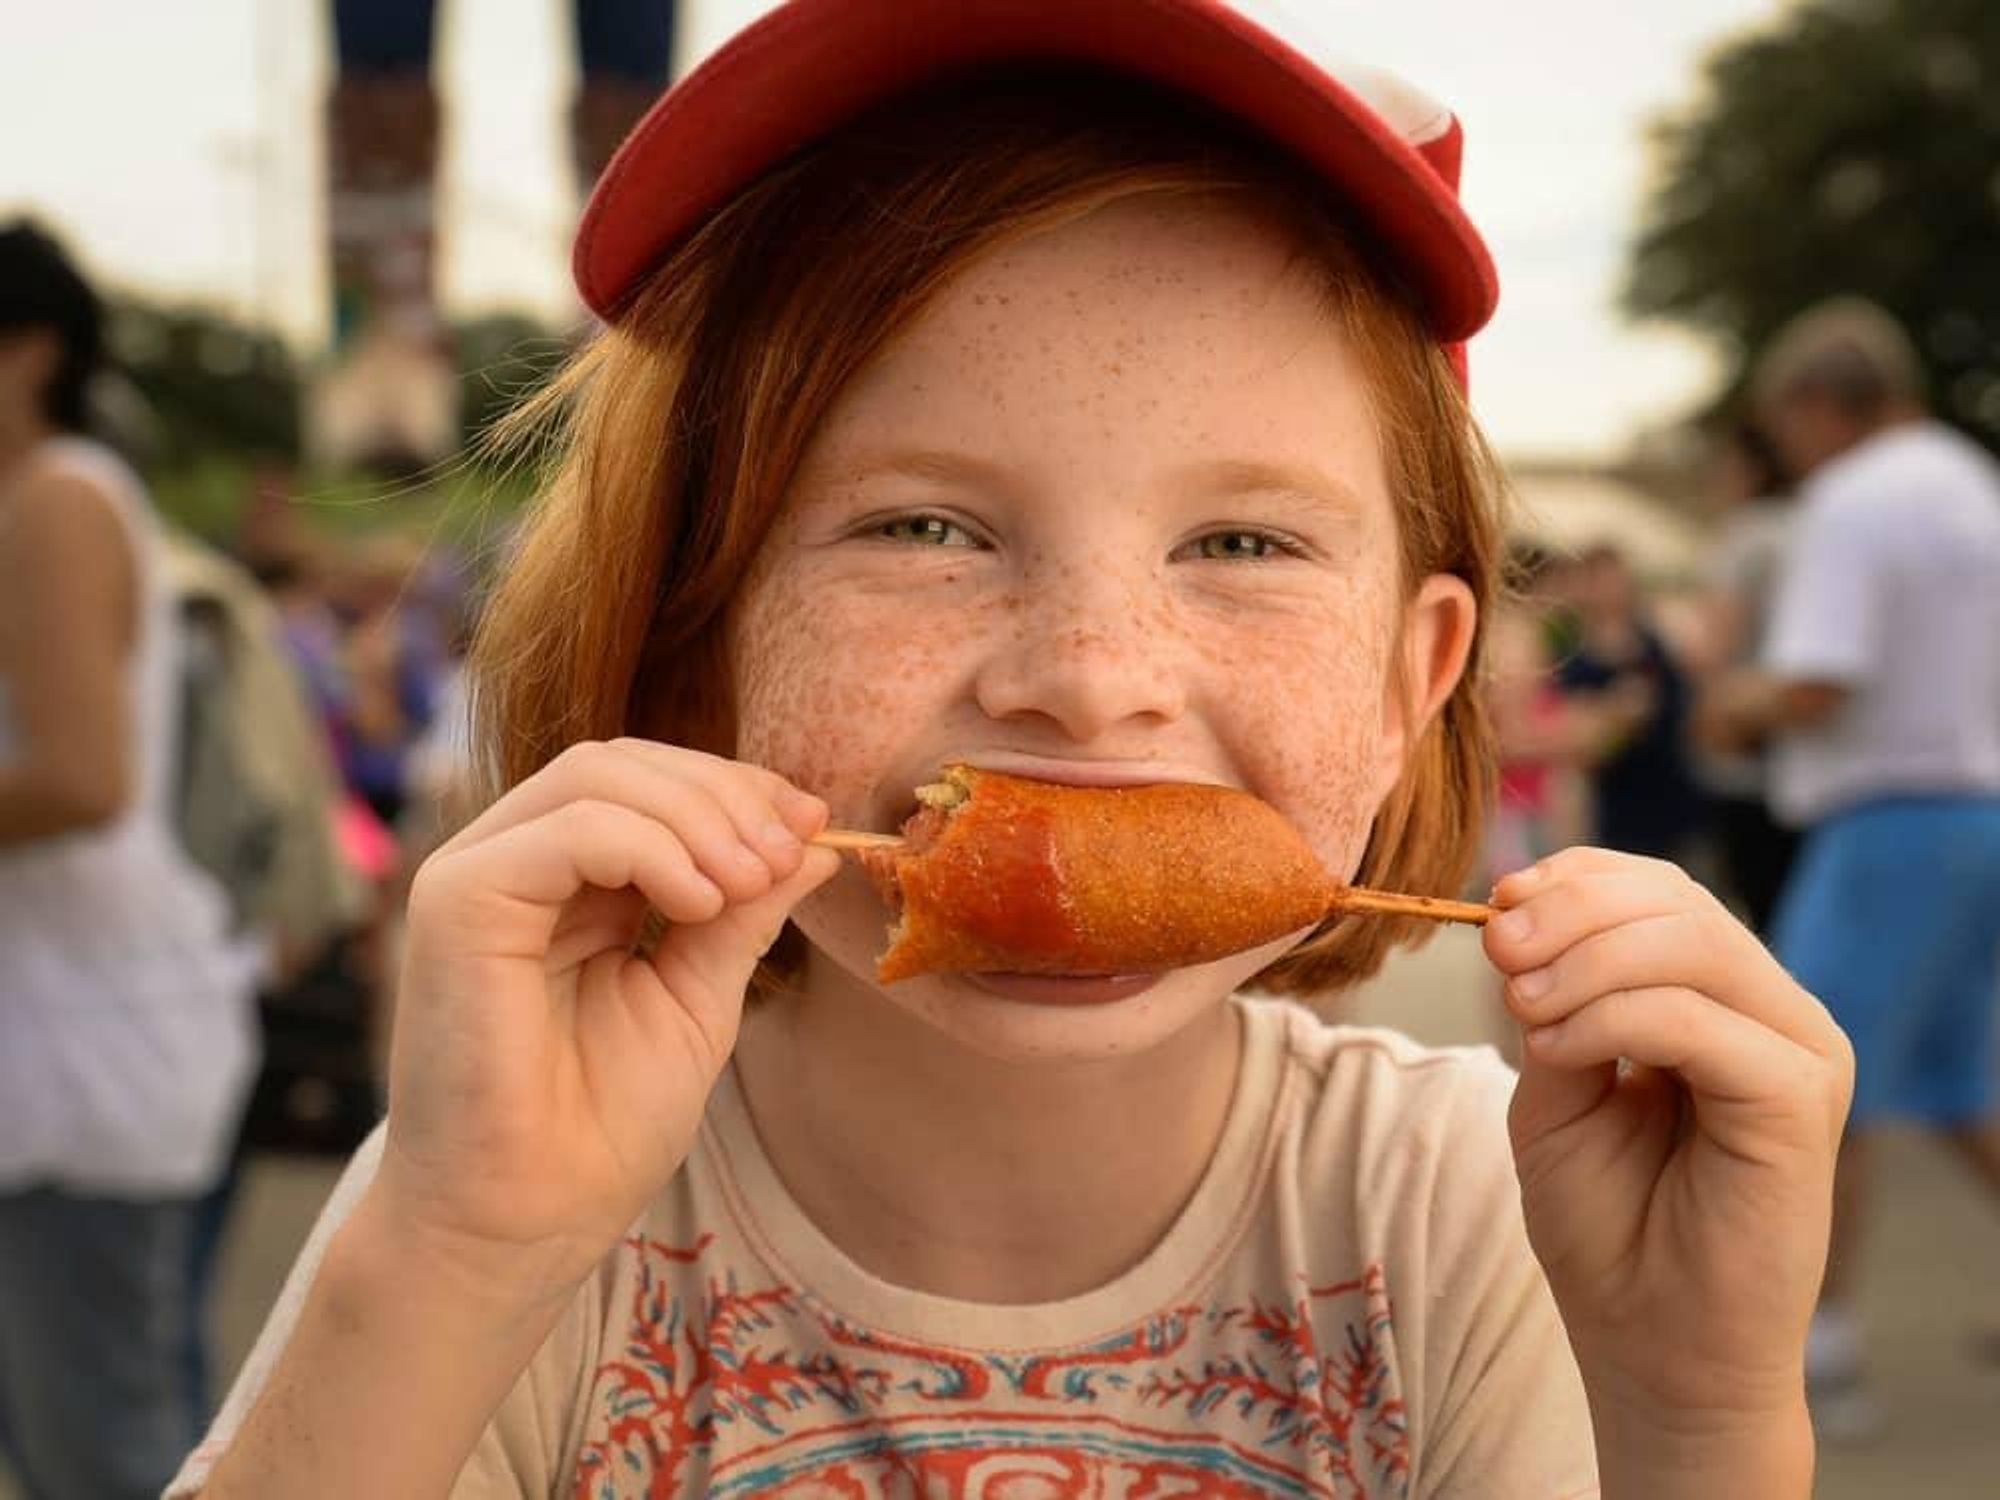 Child eating a corn dog at the State Fair of Texas